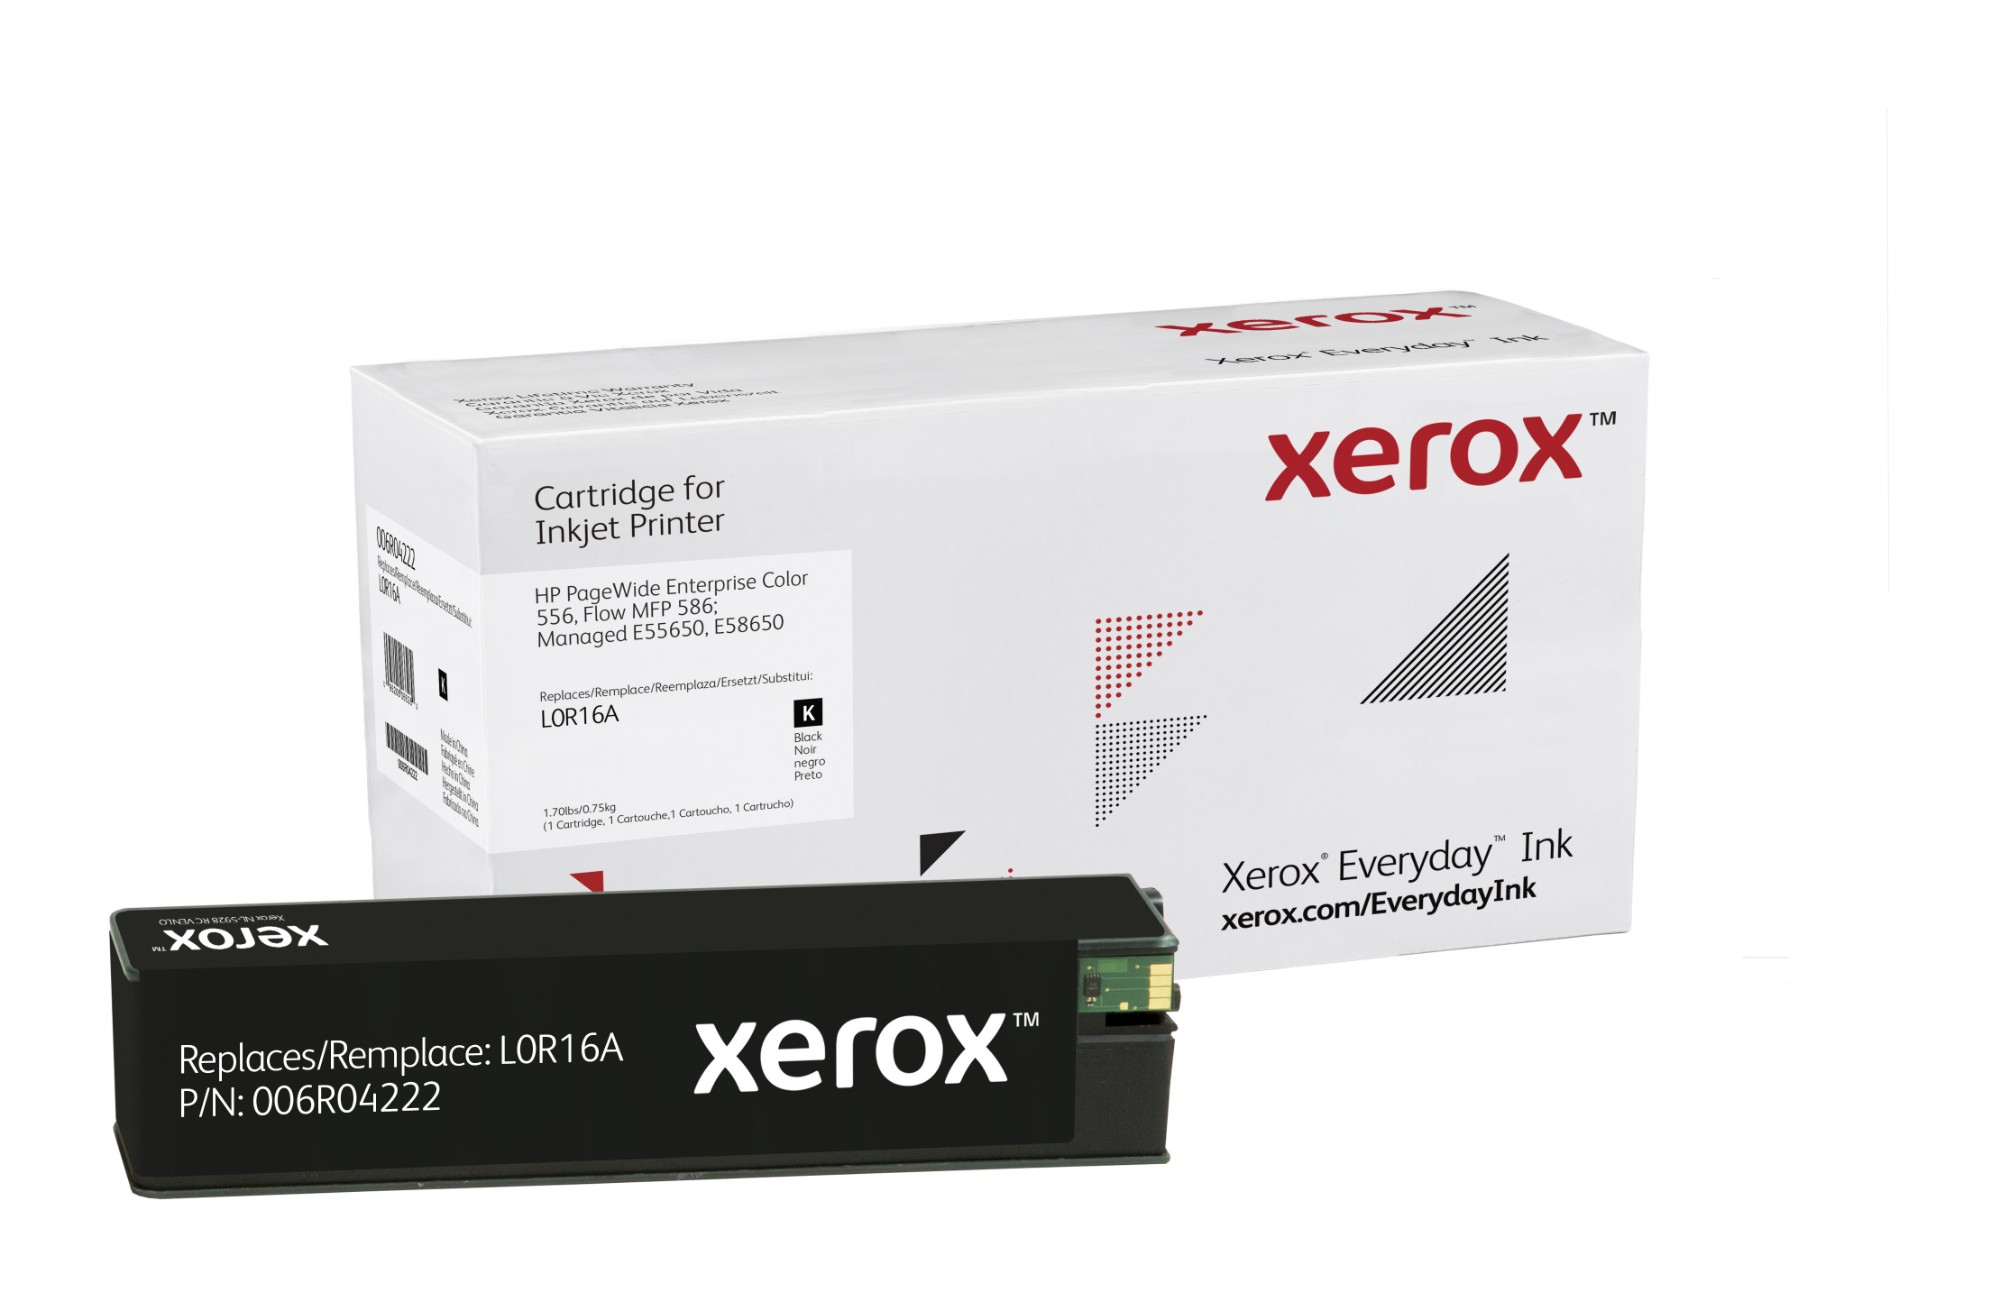 Xerox Everyday Ink for HP L0R16A Black Ink Cartridge